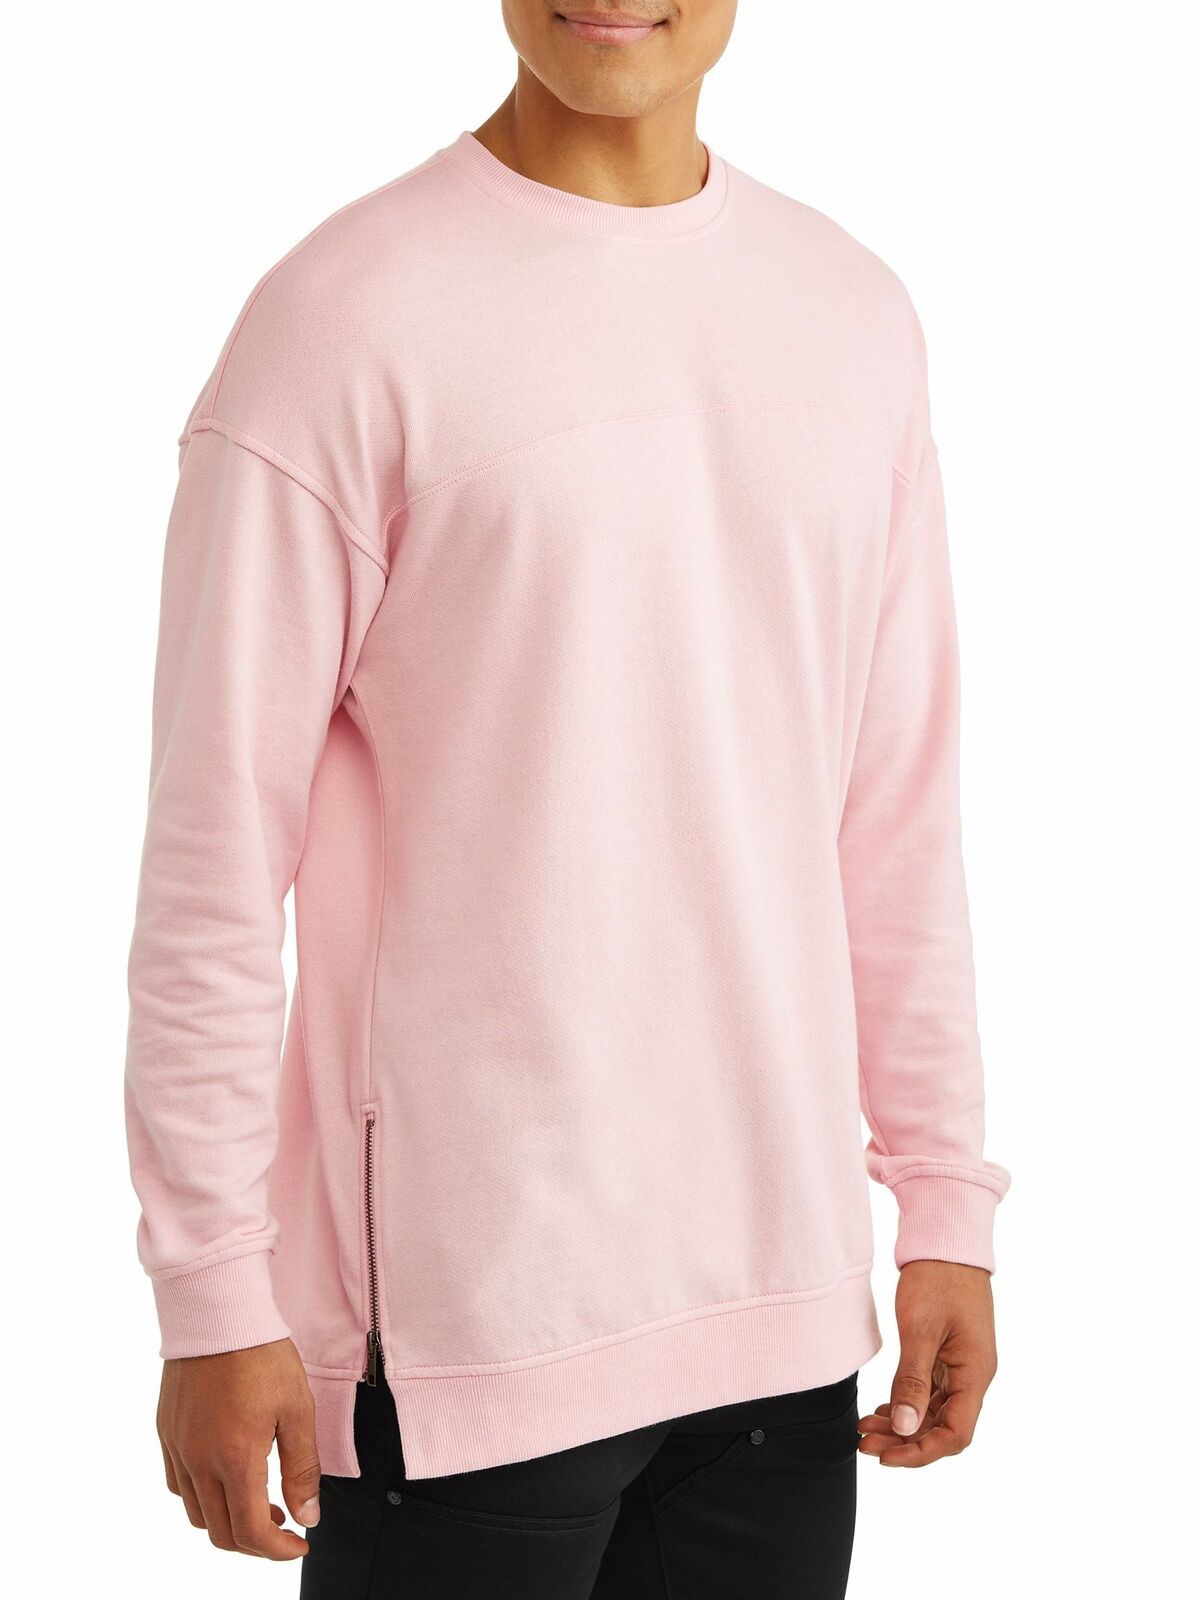 Primary image for No Boundaries Men Long Sleeve French Terry Crewneck Sweatshirt Size XS/XCH 30-32